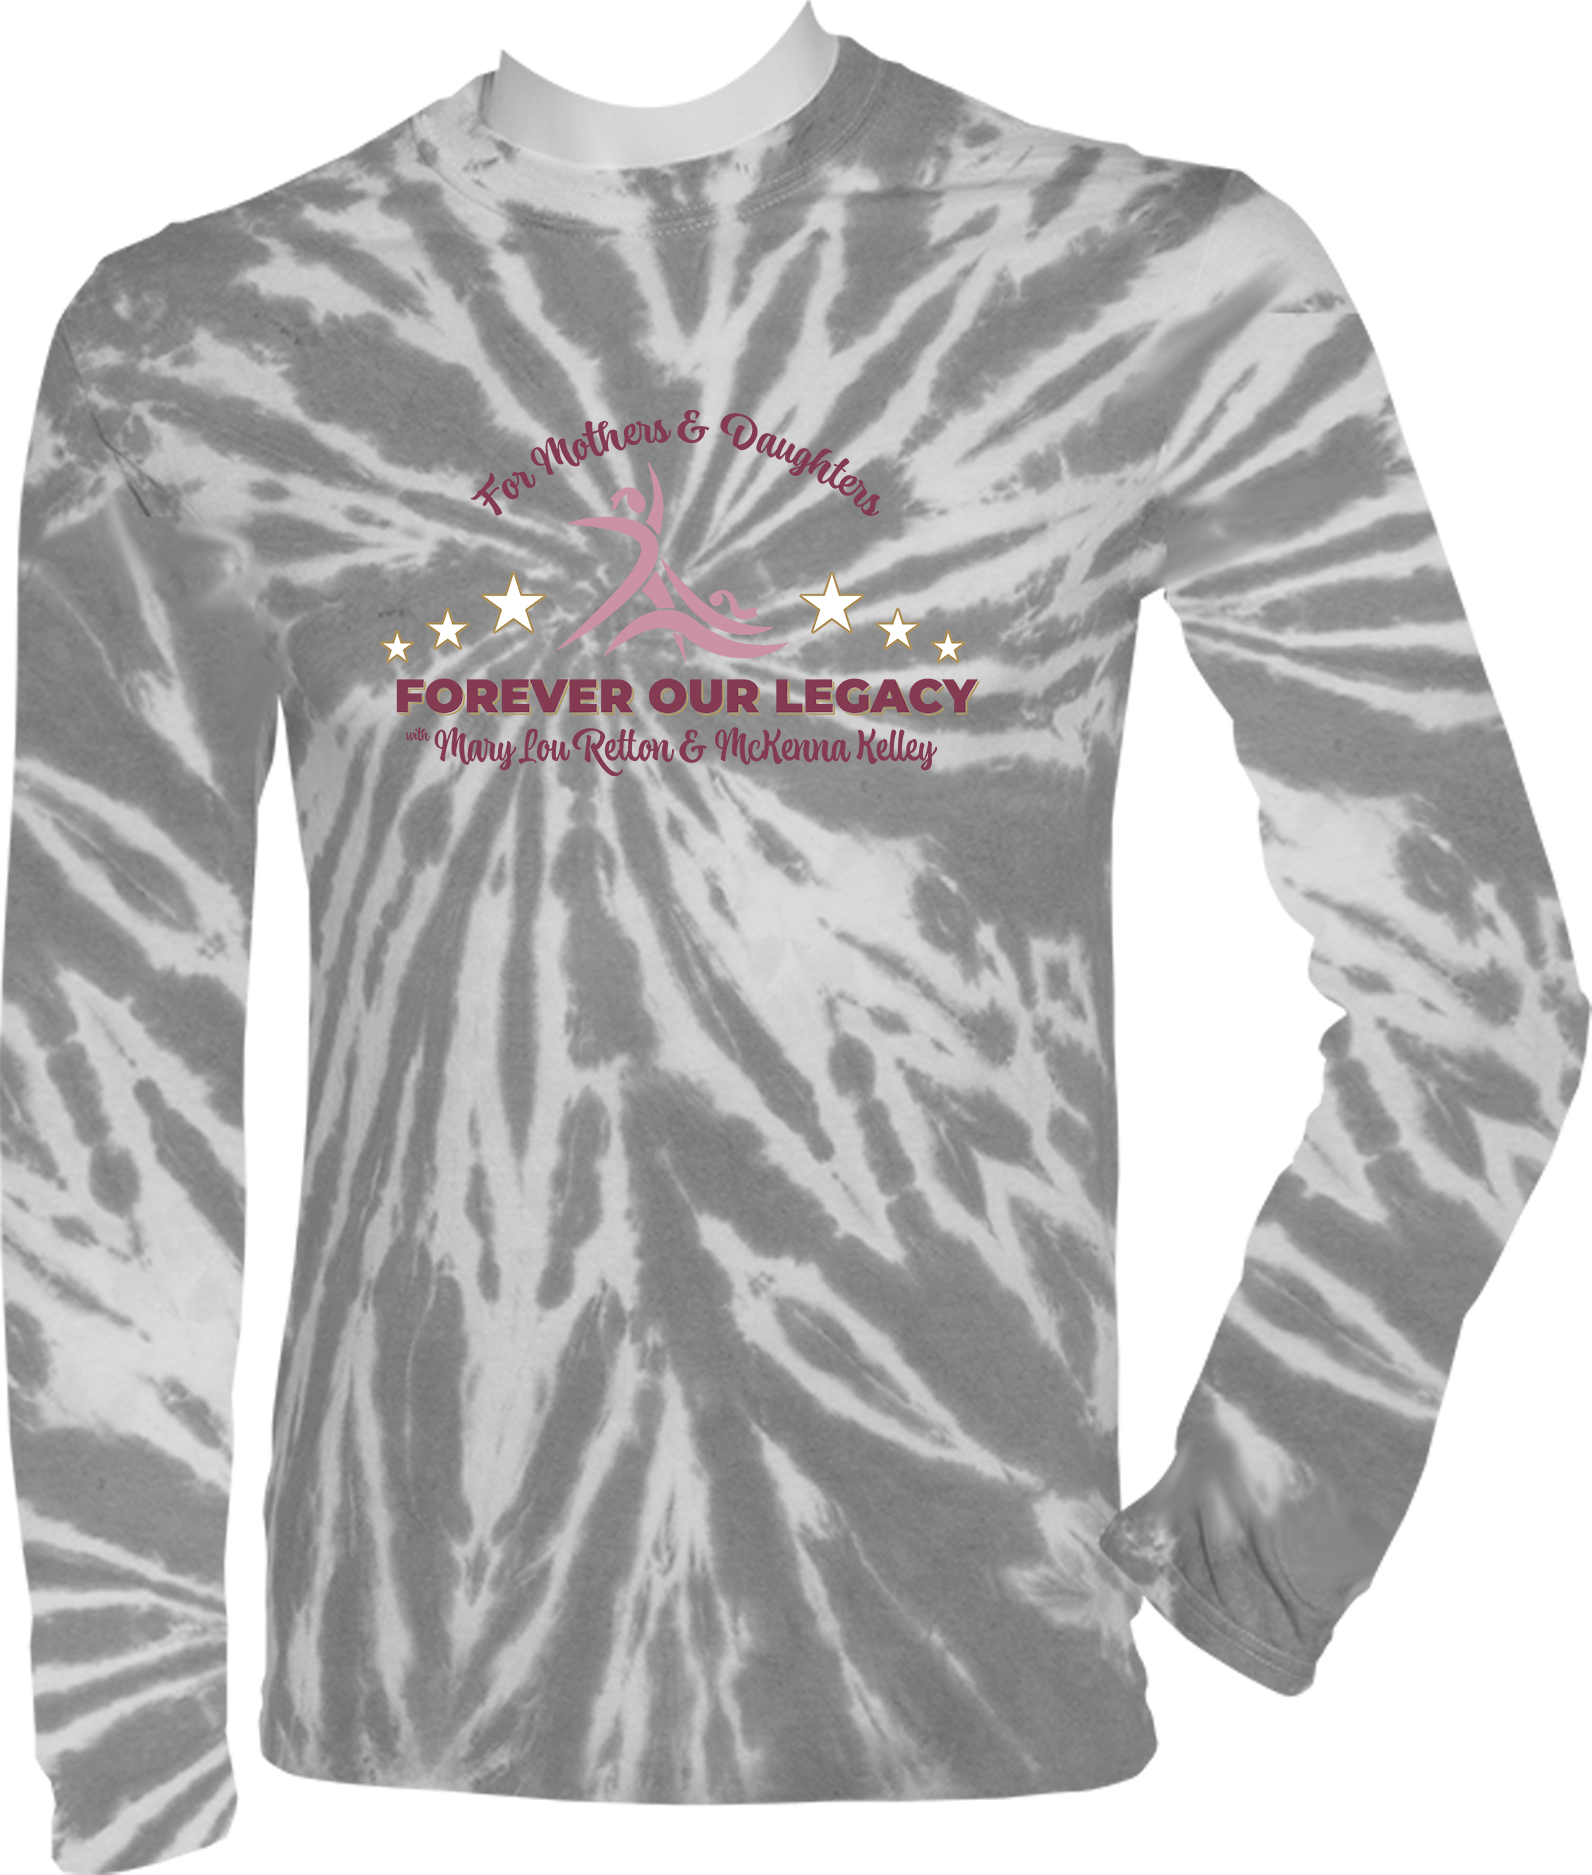 Tie-Dye Long Sleeves - 2024 For Mothers & Daughters Forever Our Legacy Mary Lou Retton